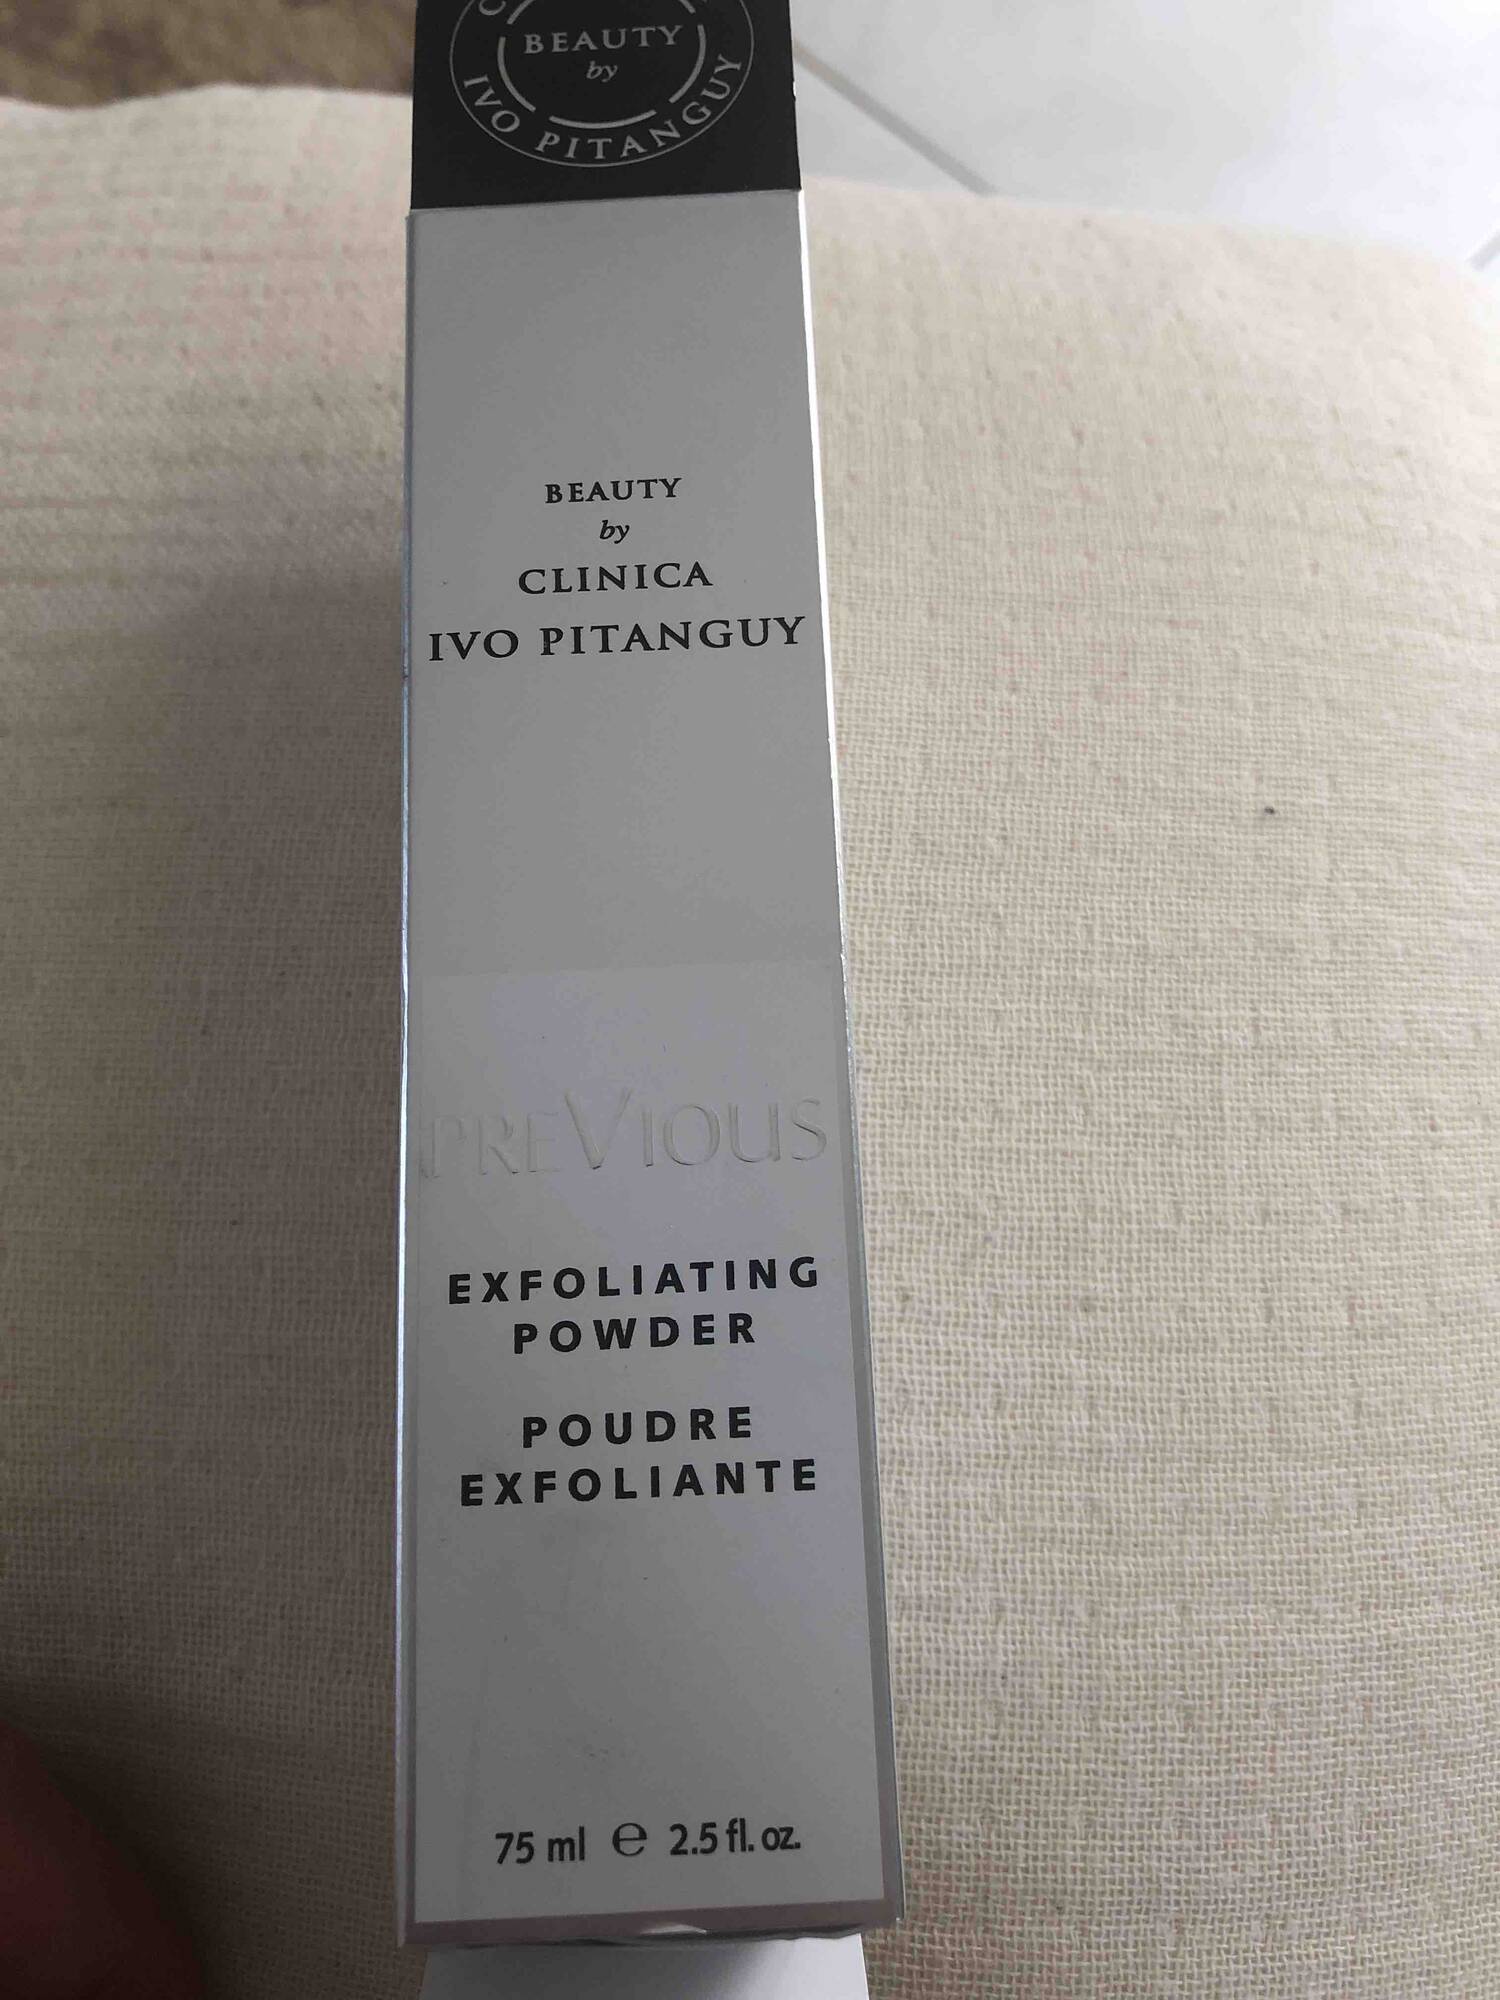 BEAUTY BY CLINICA IVO PITANGUY - Poudre exfoliante